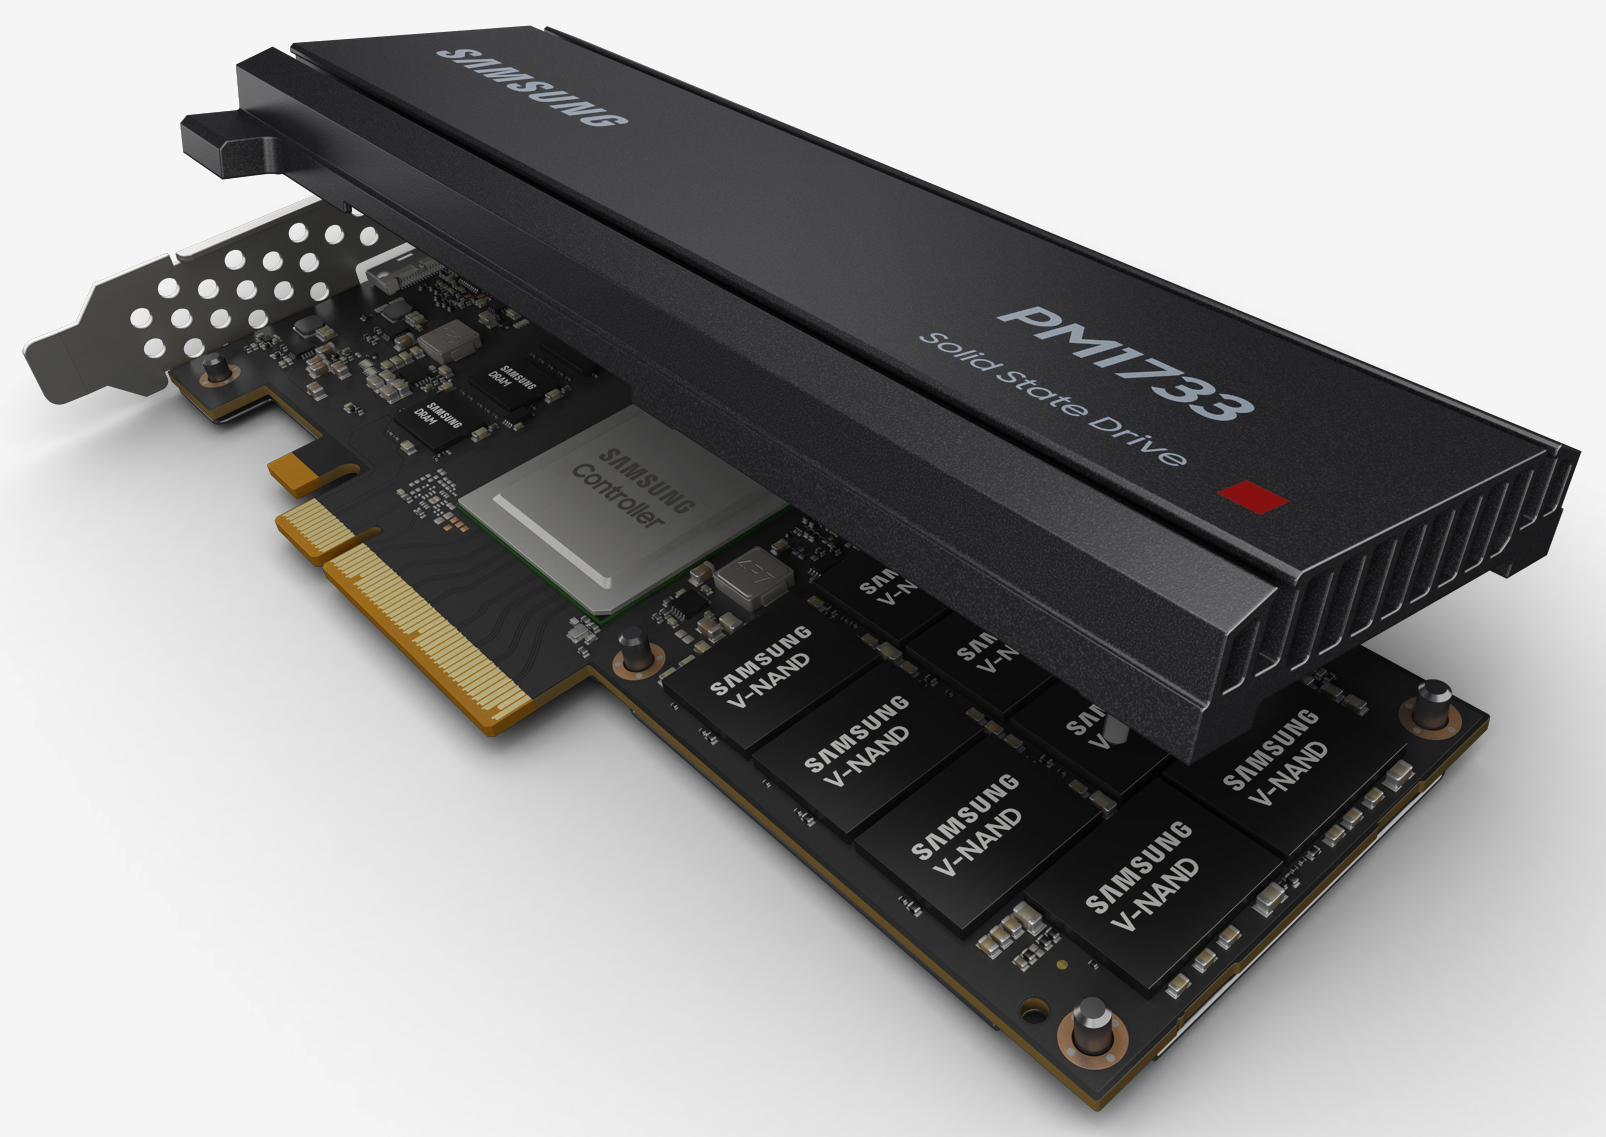 Samsung announces the PM1733 PCIe 4.0, the industry's highest performing SSD